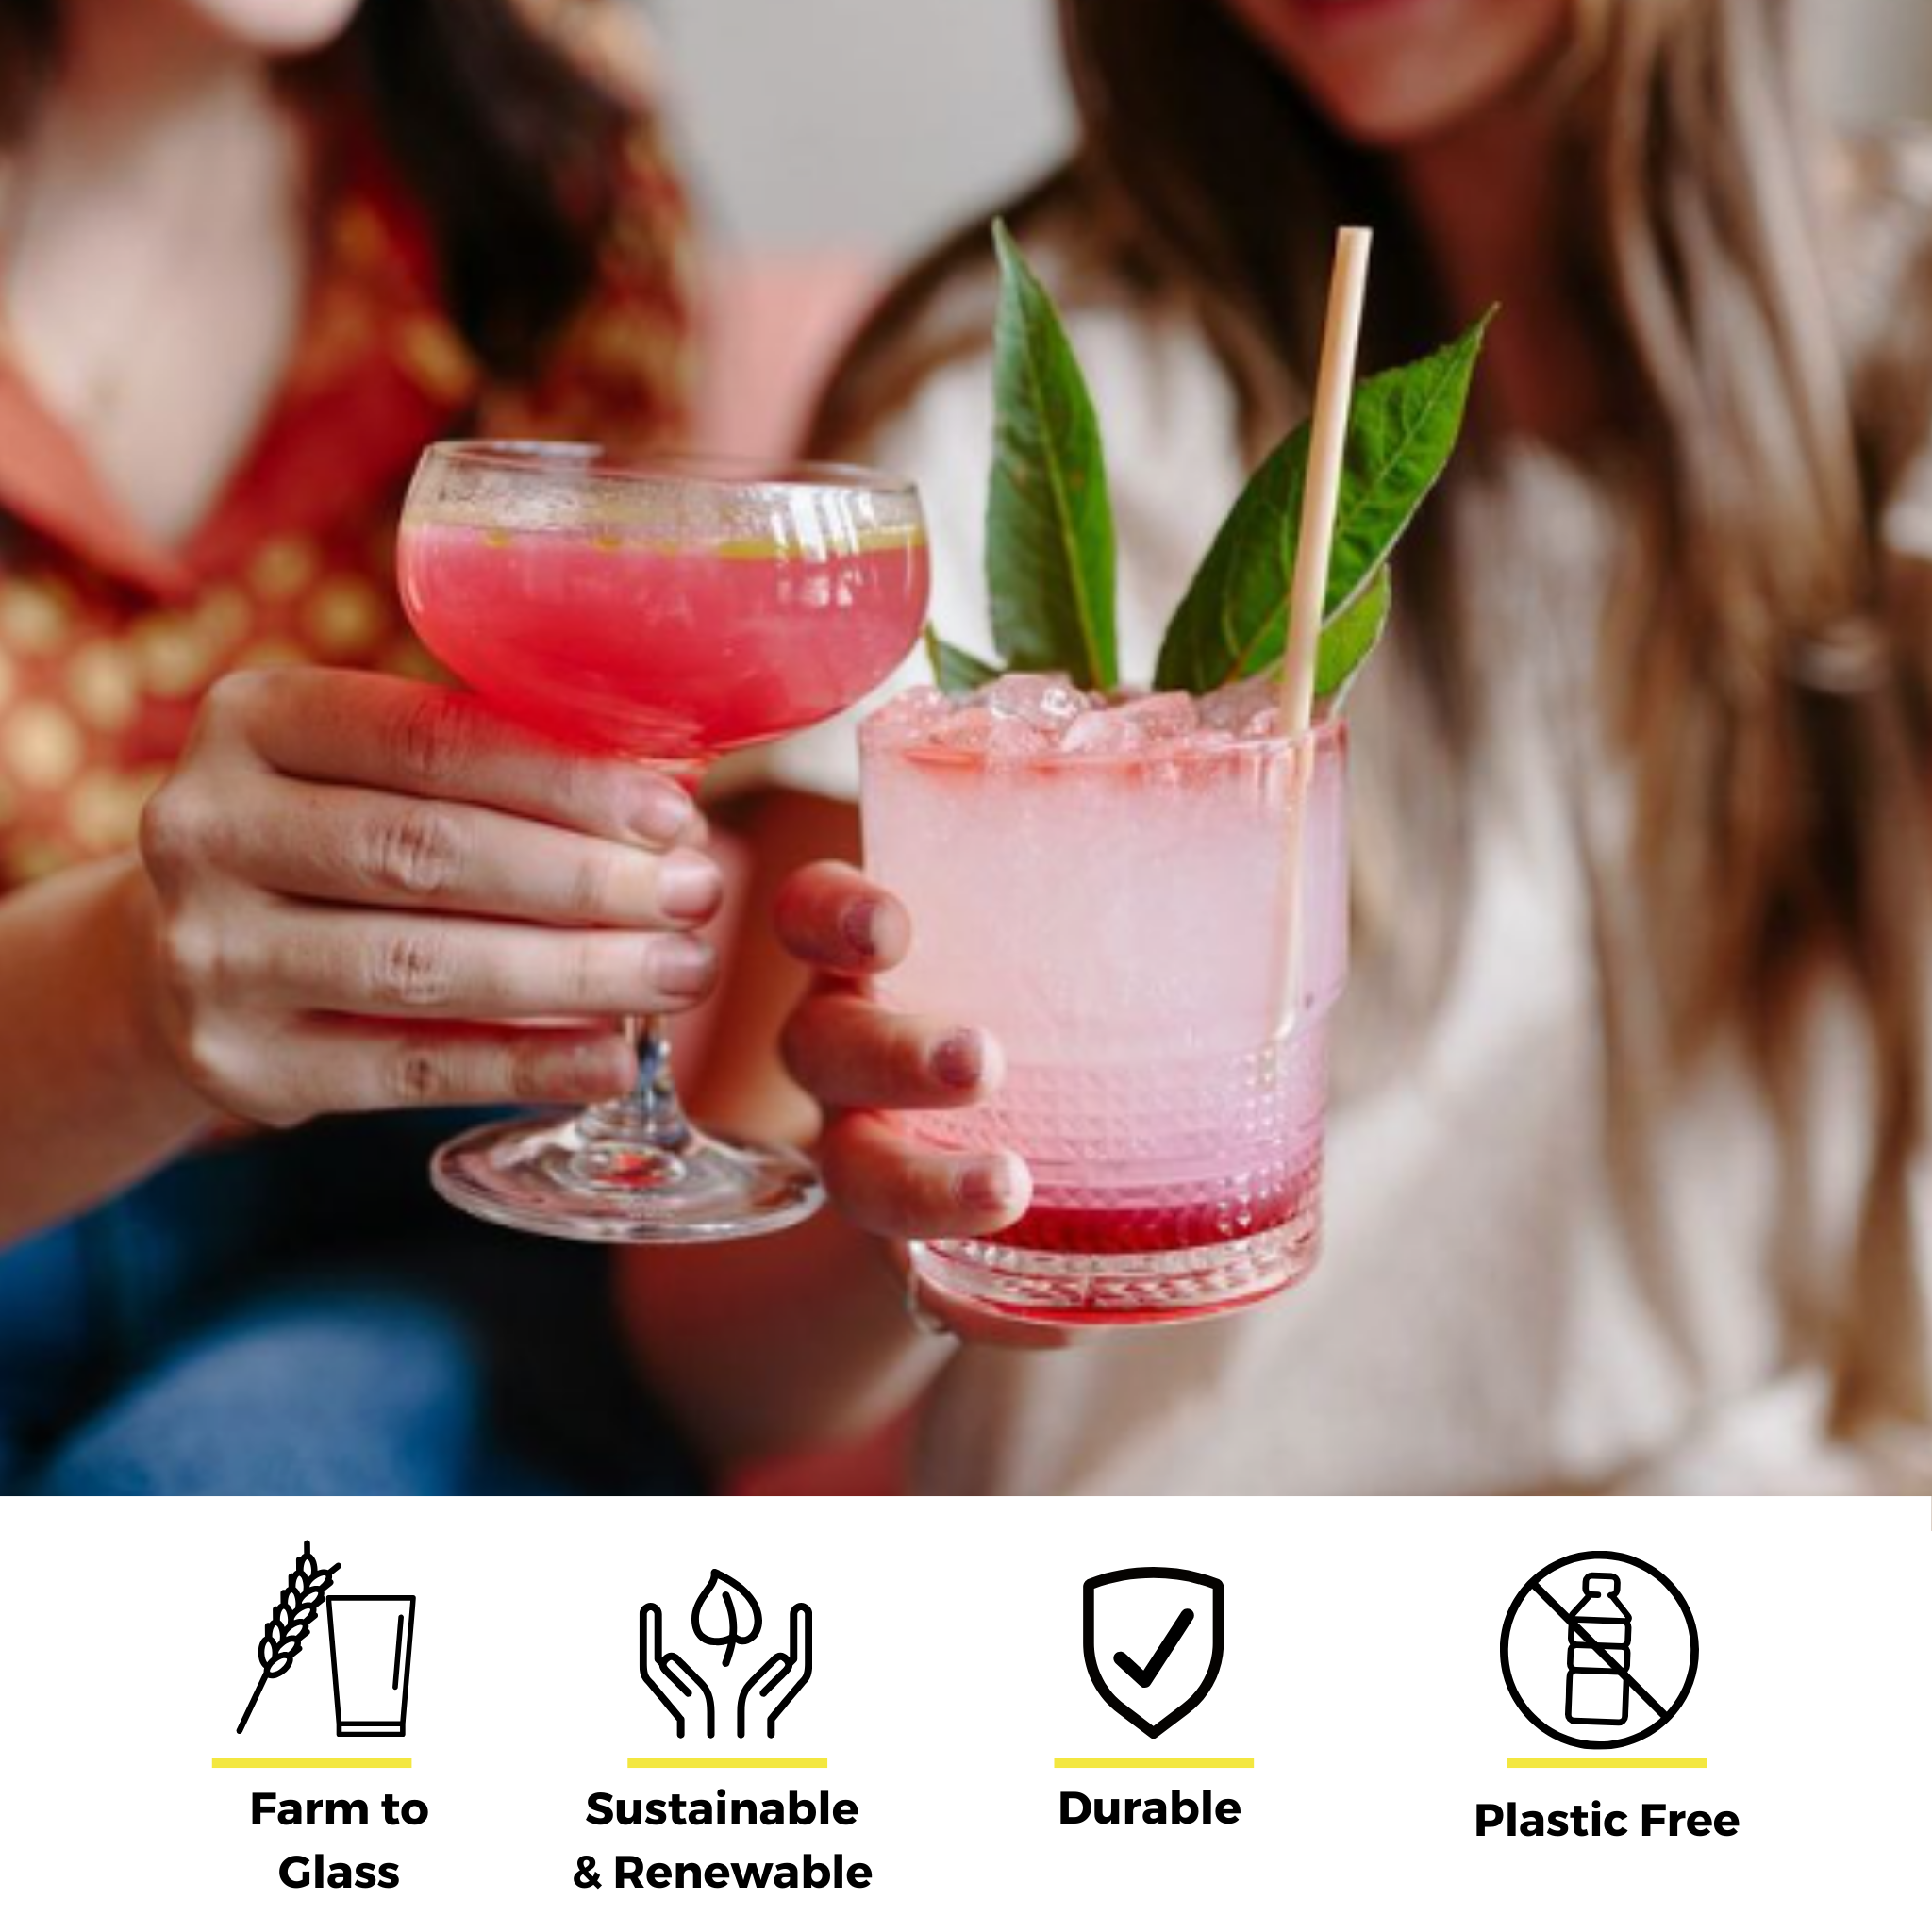 Two women are holding colorful cocktails, one in a coupe glass and the other in a clear glass with a cocktail skinny reed straw. The drinks are garnished with leaves and fruit, while icons below highlight that the straws are farm-to-glass, sustainable and renewable, durable, and plastic-free.